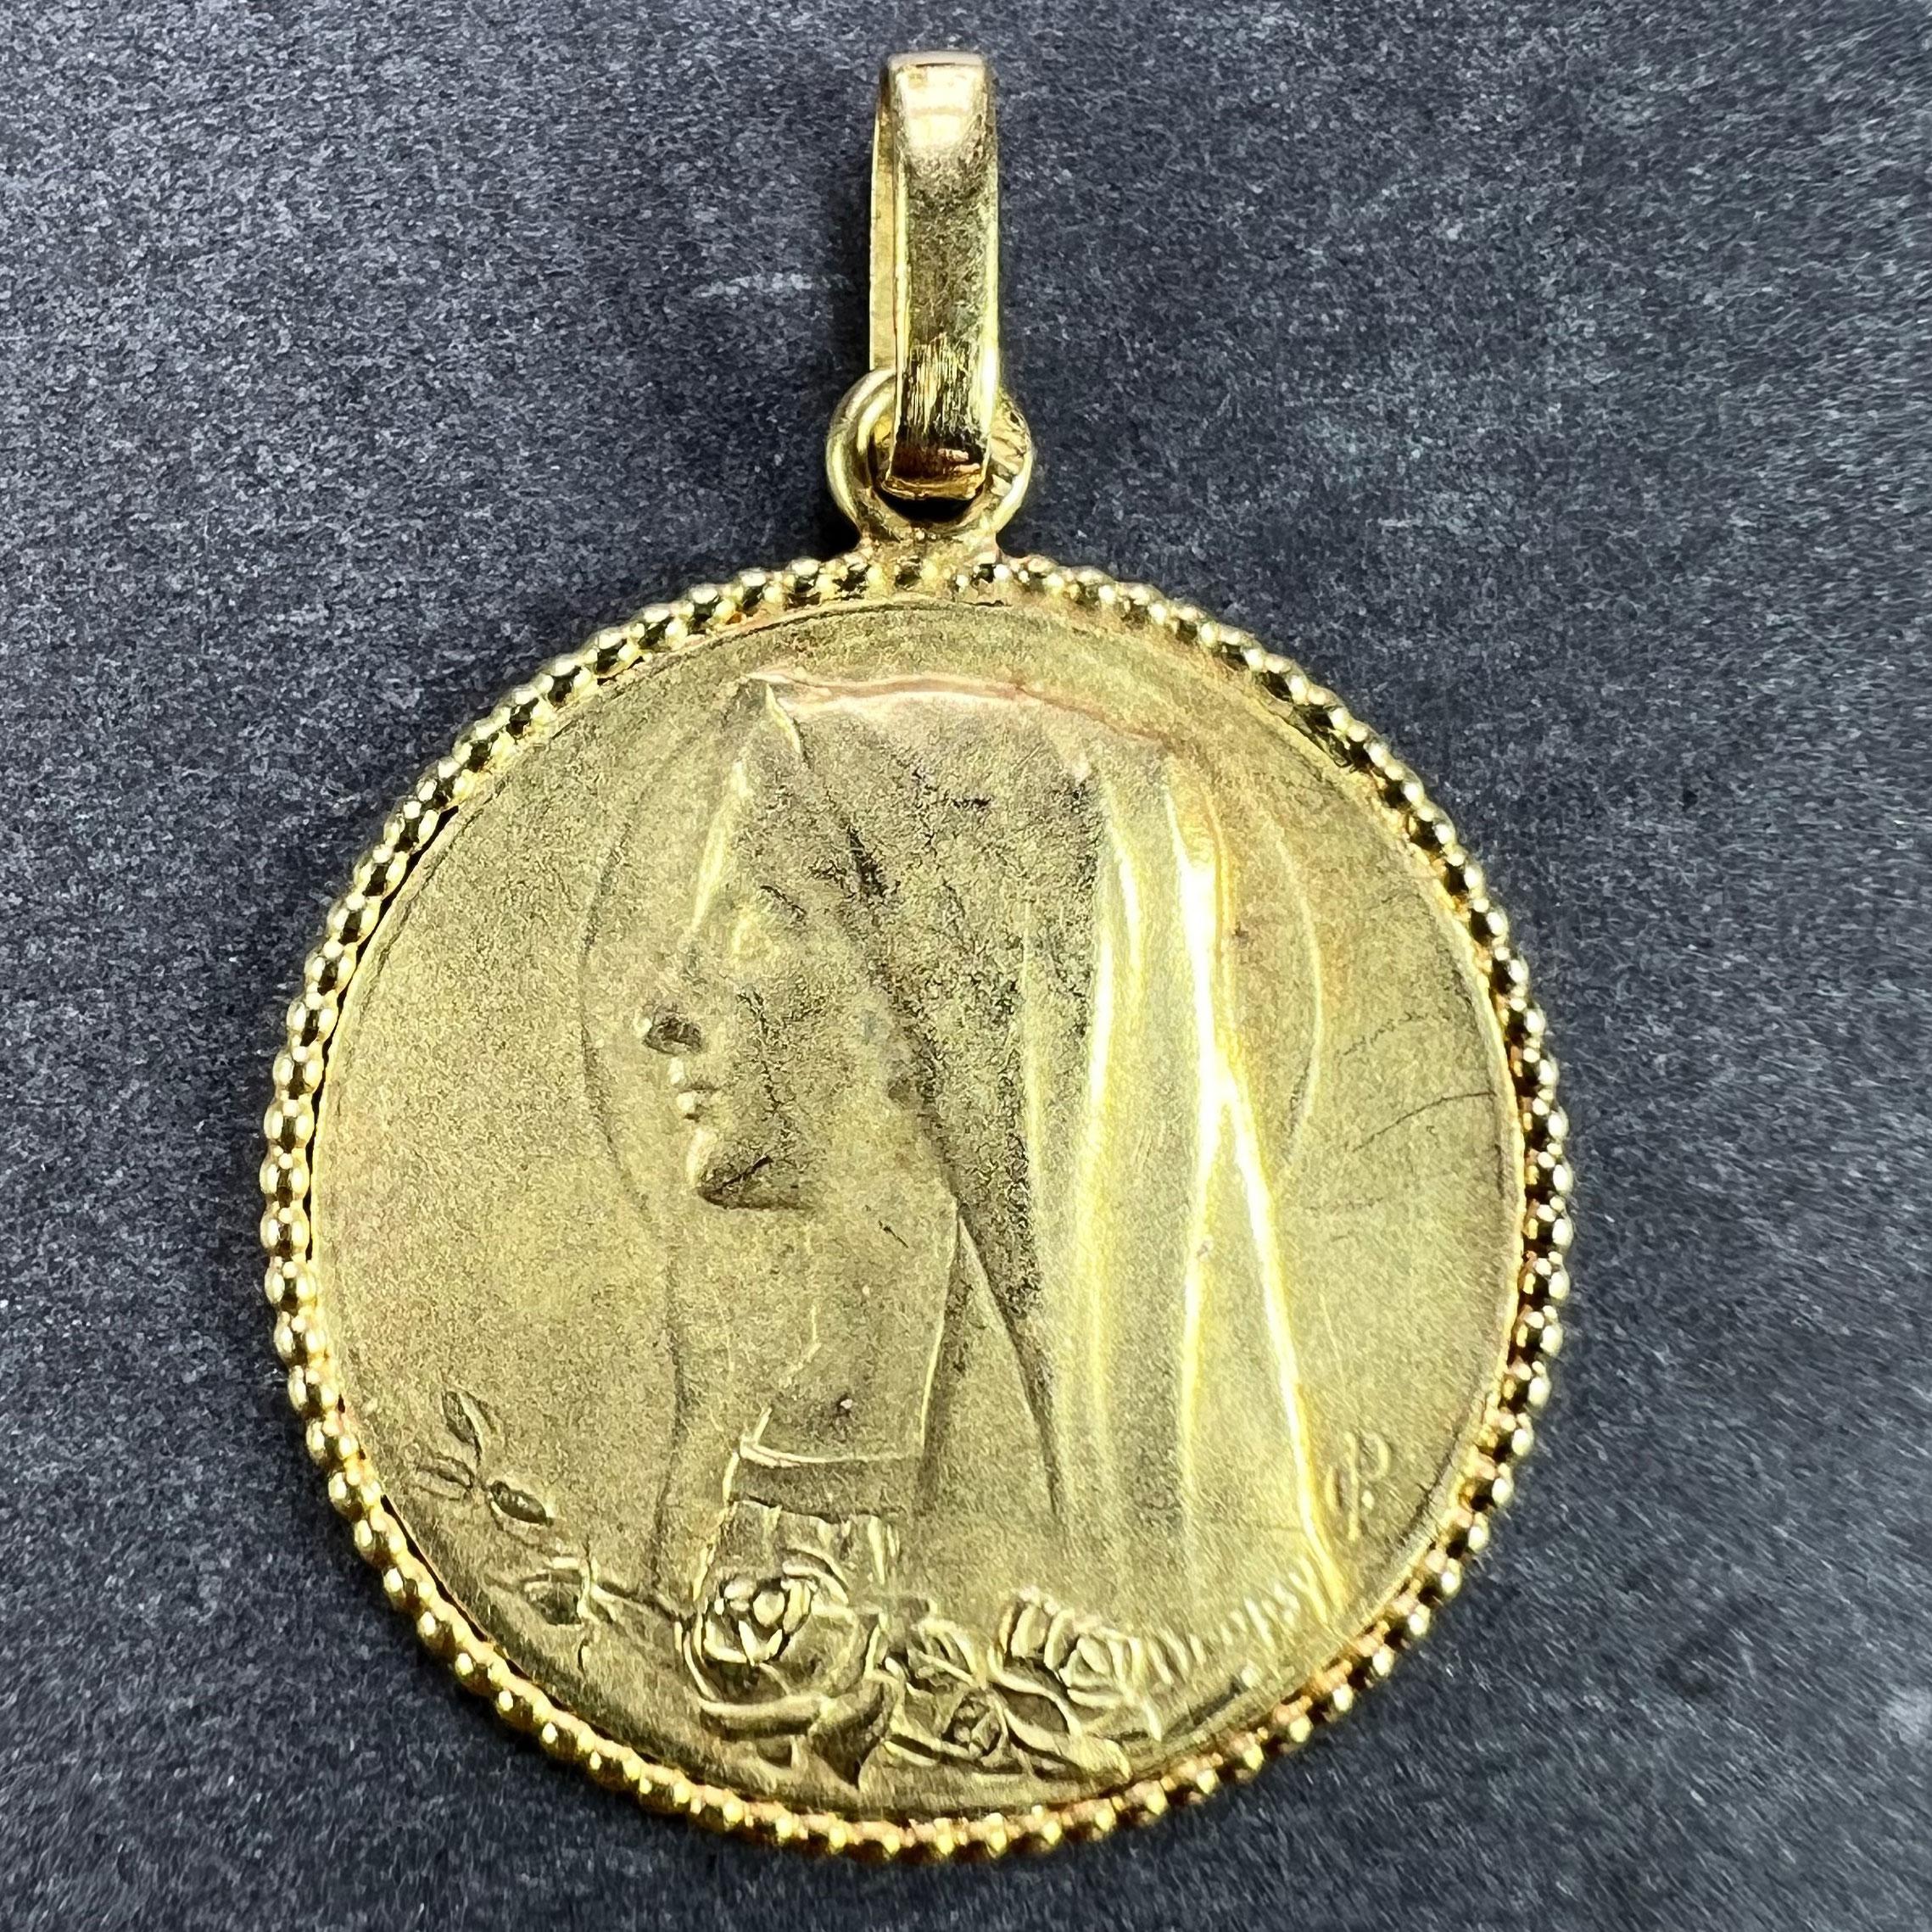 An 18 karat (18K) yellow gold pendant designed as a round medal depicting the Virgin Mary with a halo and a sheaf of roses below. Signed E. Dropsy. Stamped with the eagle's head for French manufacture and 18 karat gold.

Dimensions: 2.2 x 2 x 0.1 cm